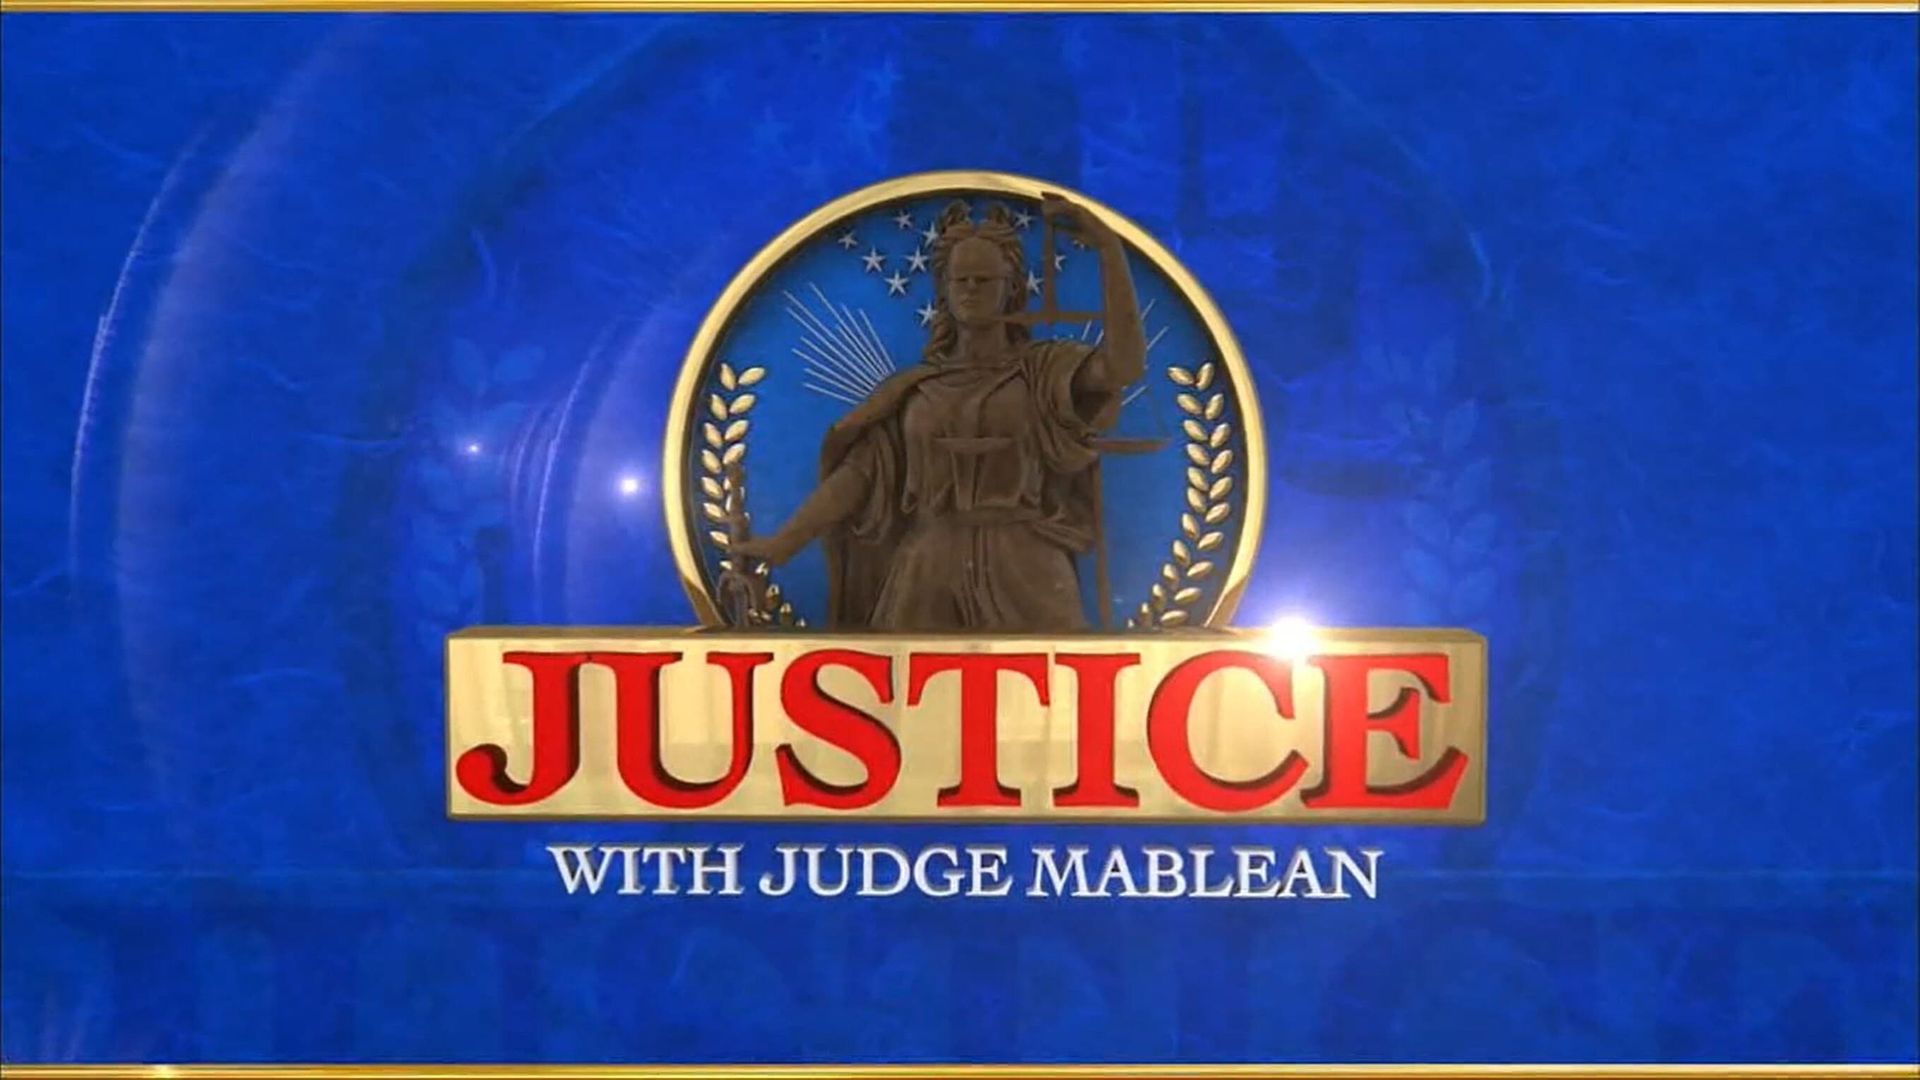 Justice with Judge Mablean background